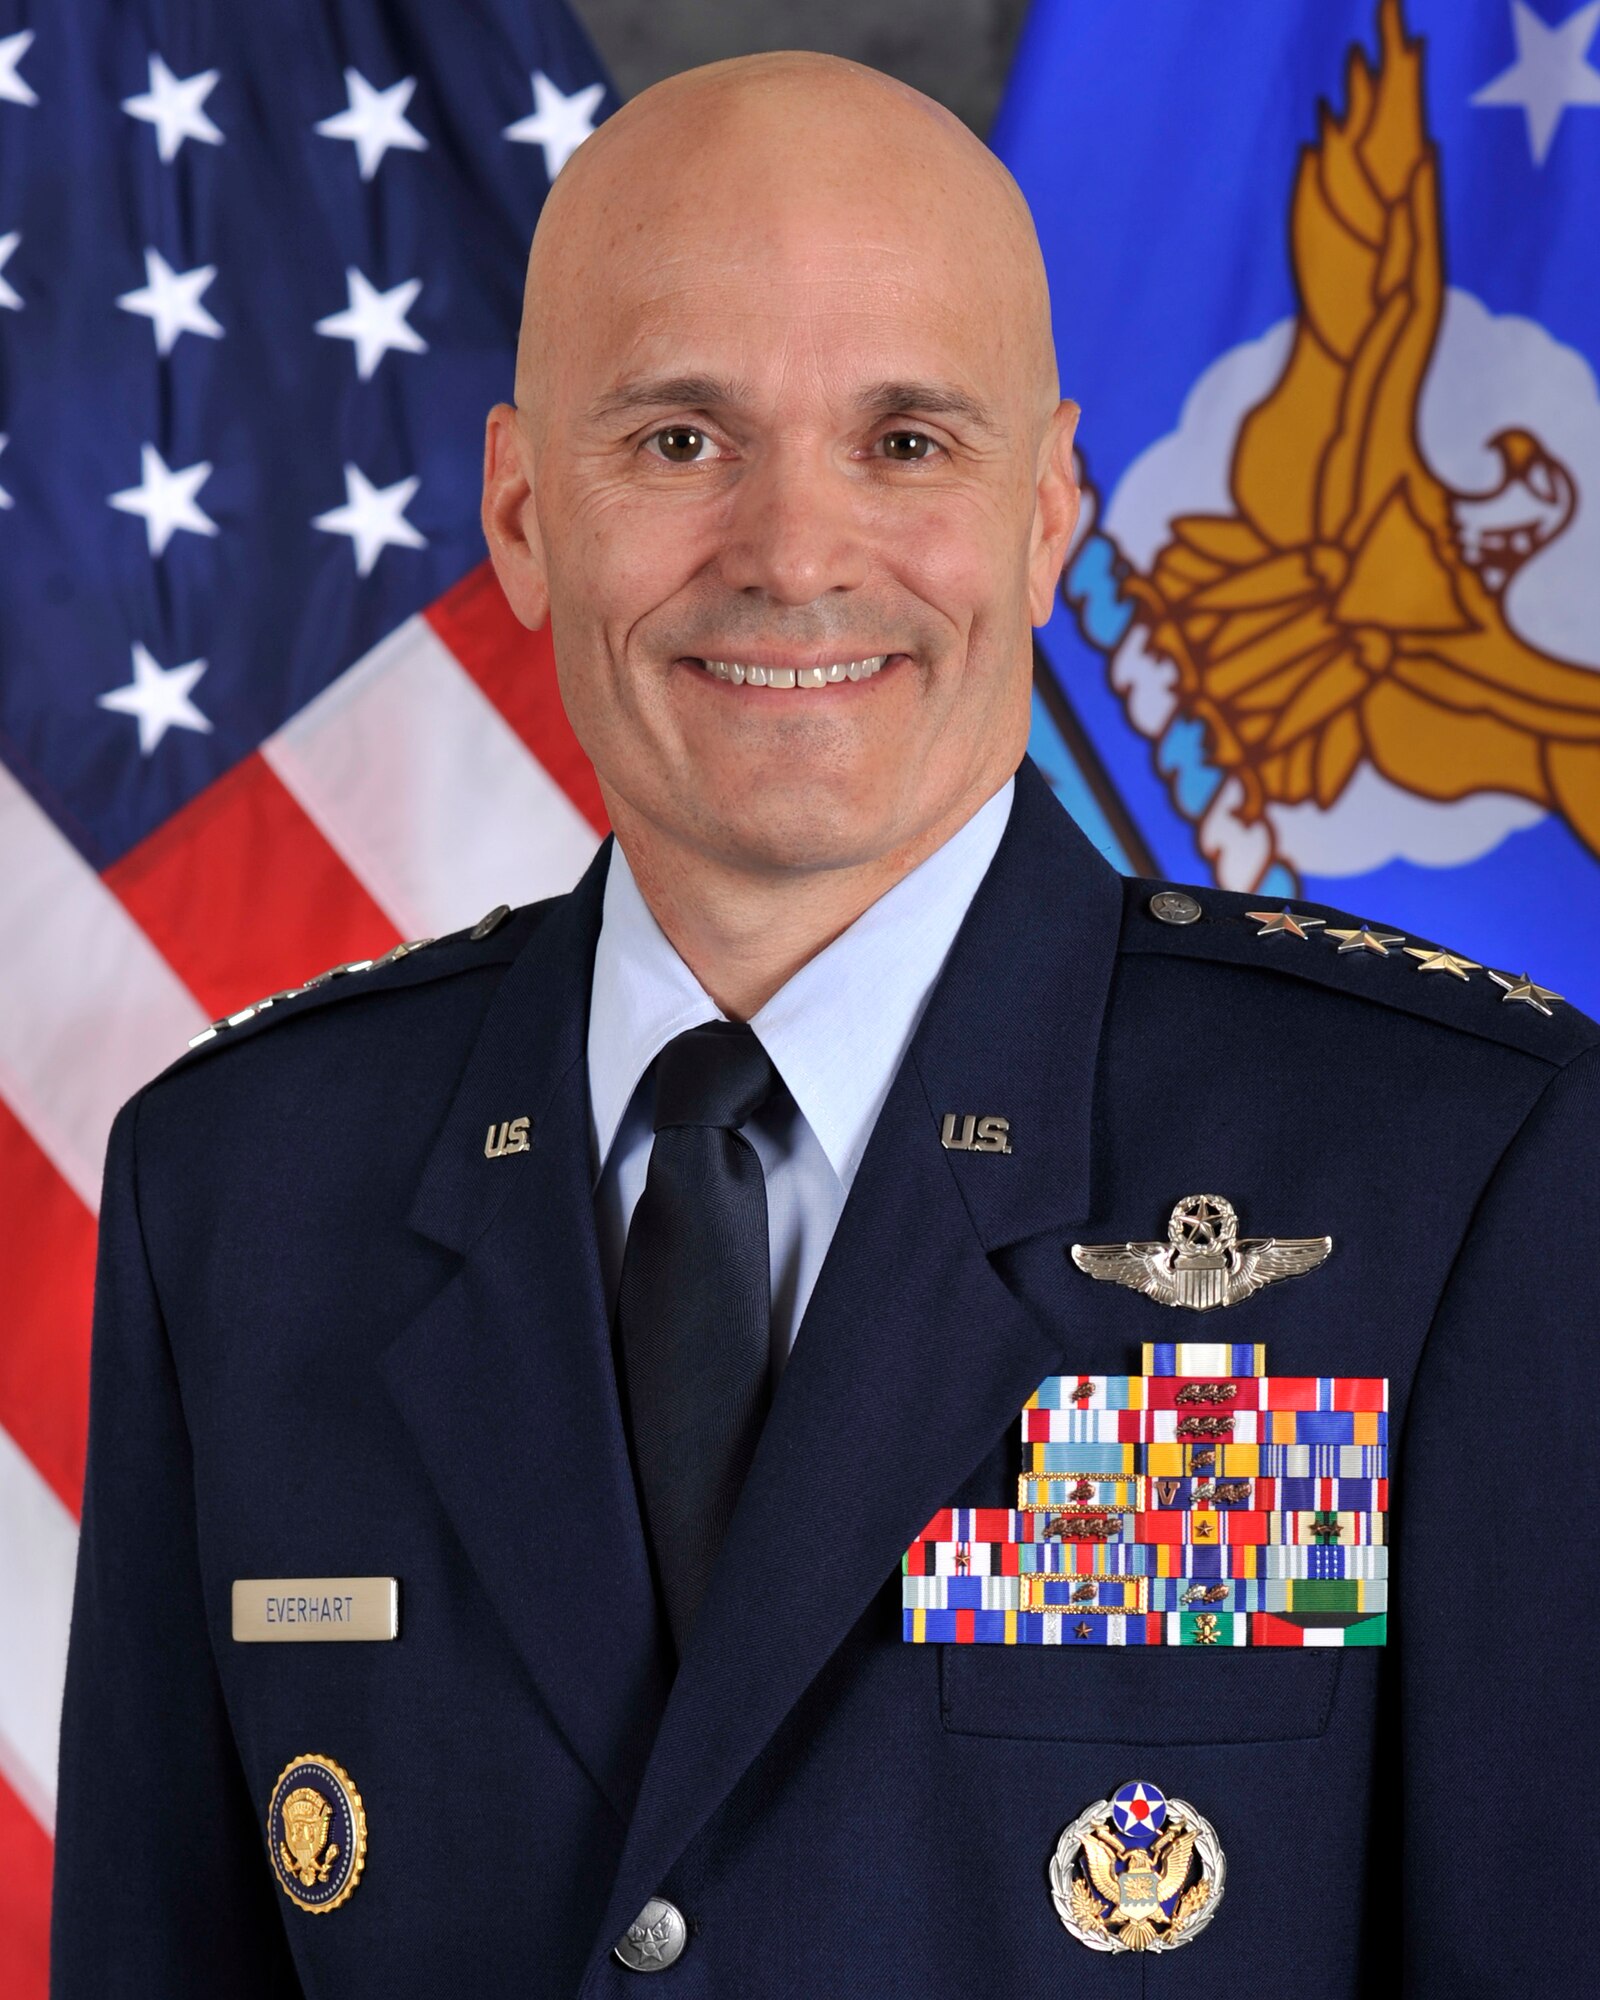 Gen. Carlton D. Everhart II, Commander, Air Mobility Command presented AMC's role in joint operations as a vital part of our national security in a presentation during AMC Headquarters staff Wingman Day activities Feb. 8, 2017 at Scott Air Force Base, Ill. 